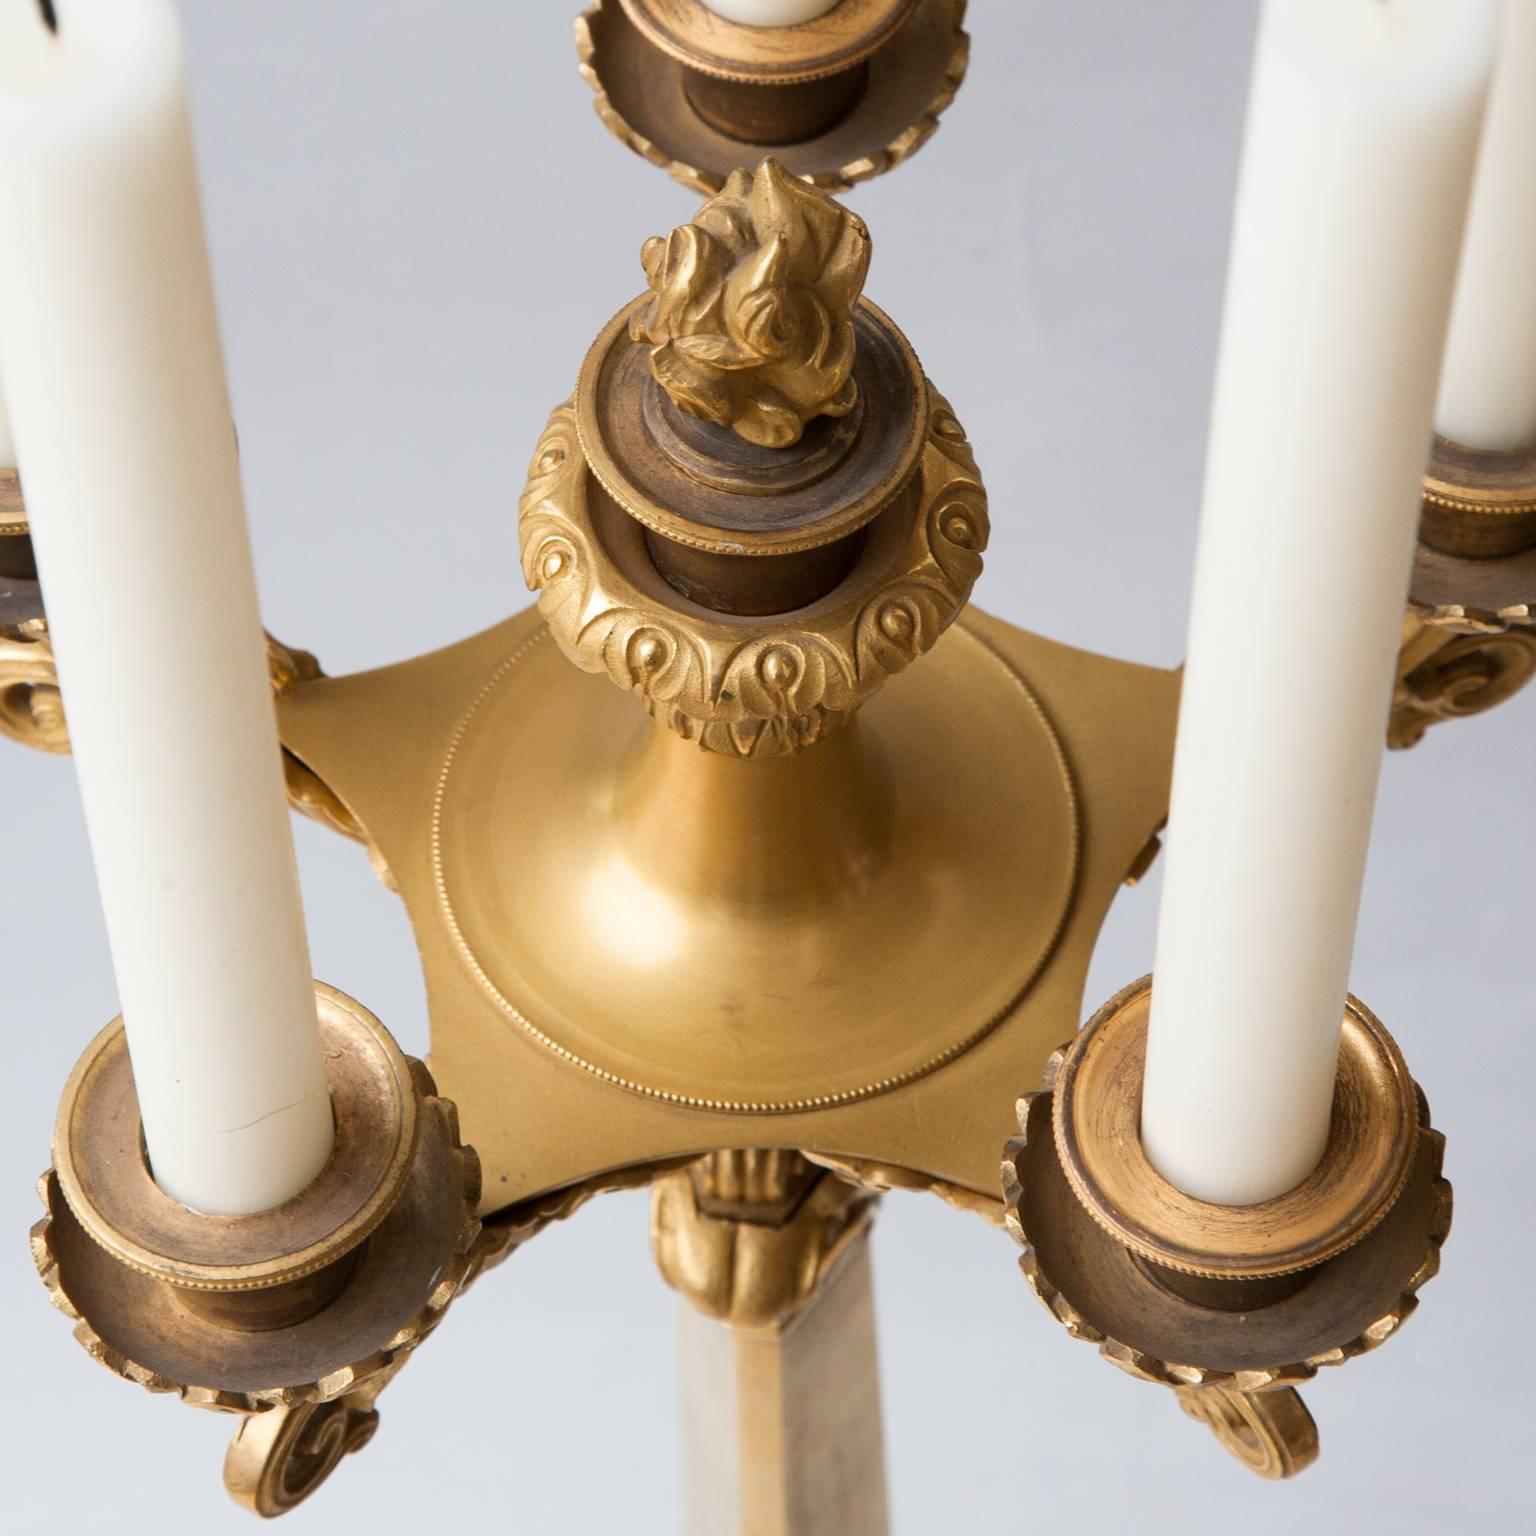 Important Pair of Early 19th Century Six-Light Ormolu Restauration Candelabra For Sale 3